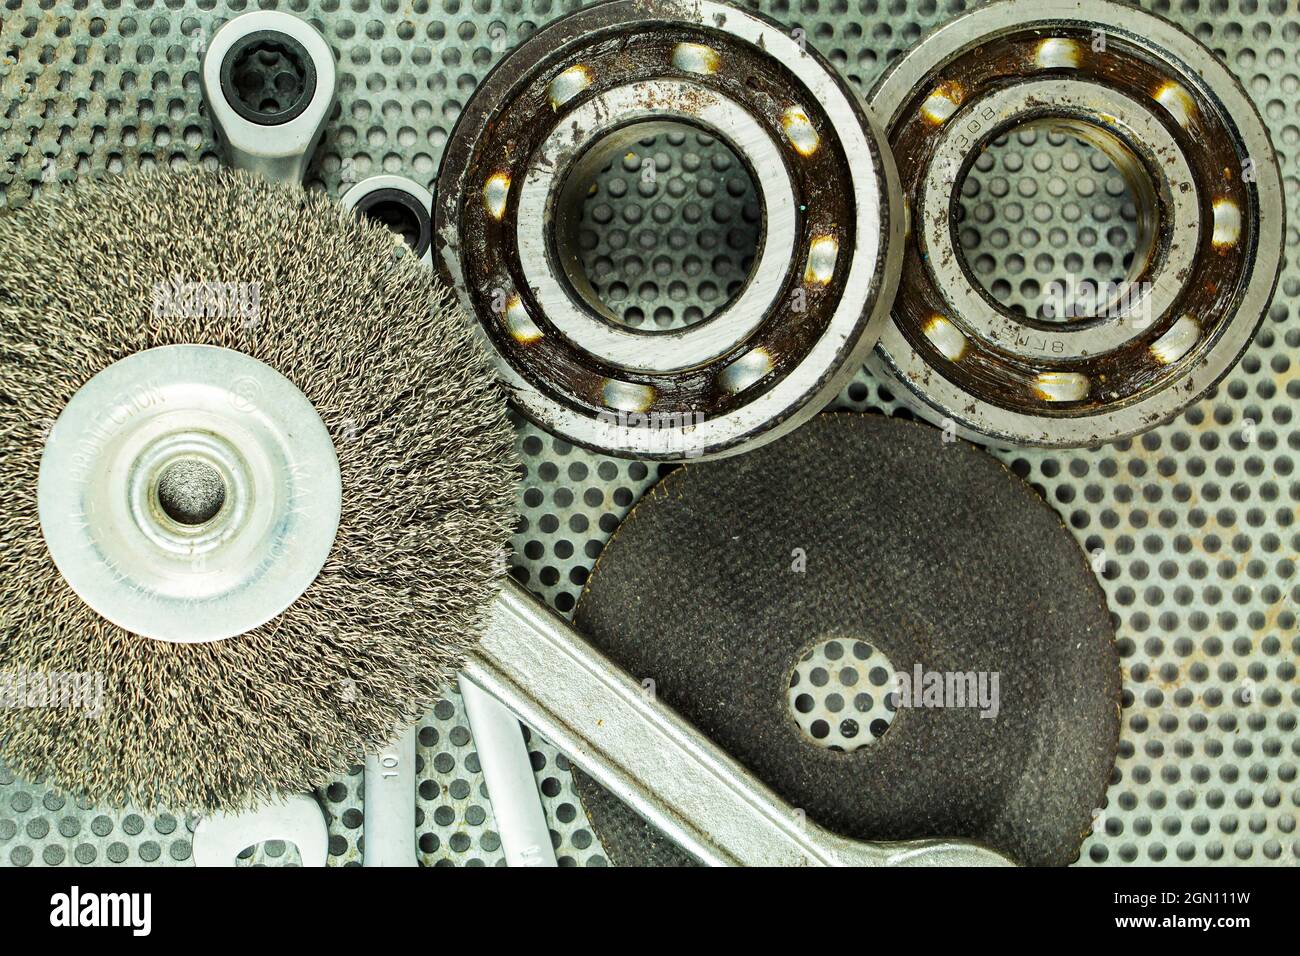 Metalworking tools, steel parts, a wrench, on the background of a metal lattice Stock Photo